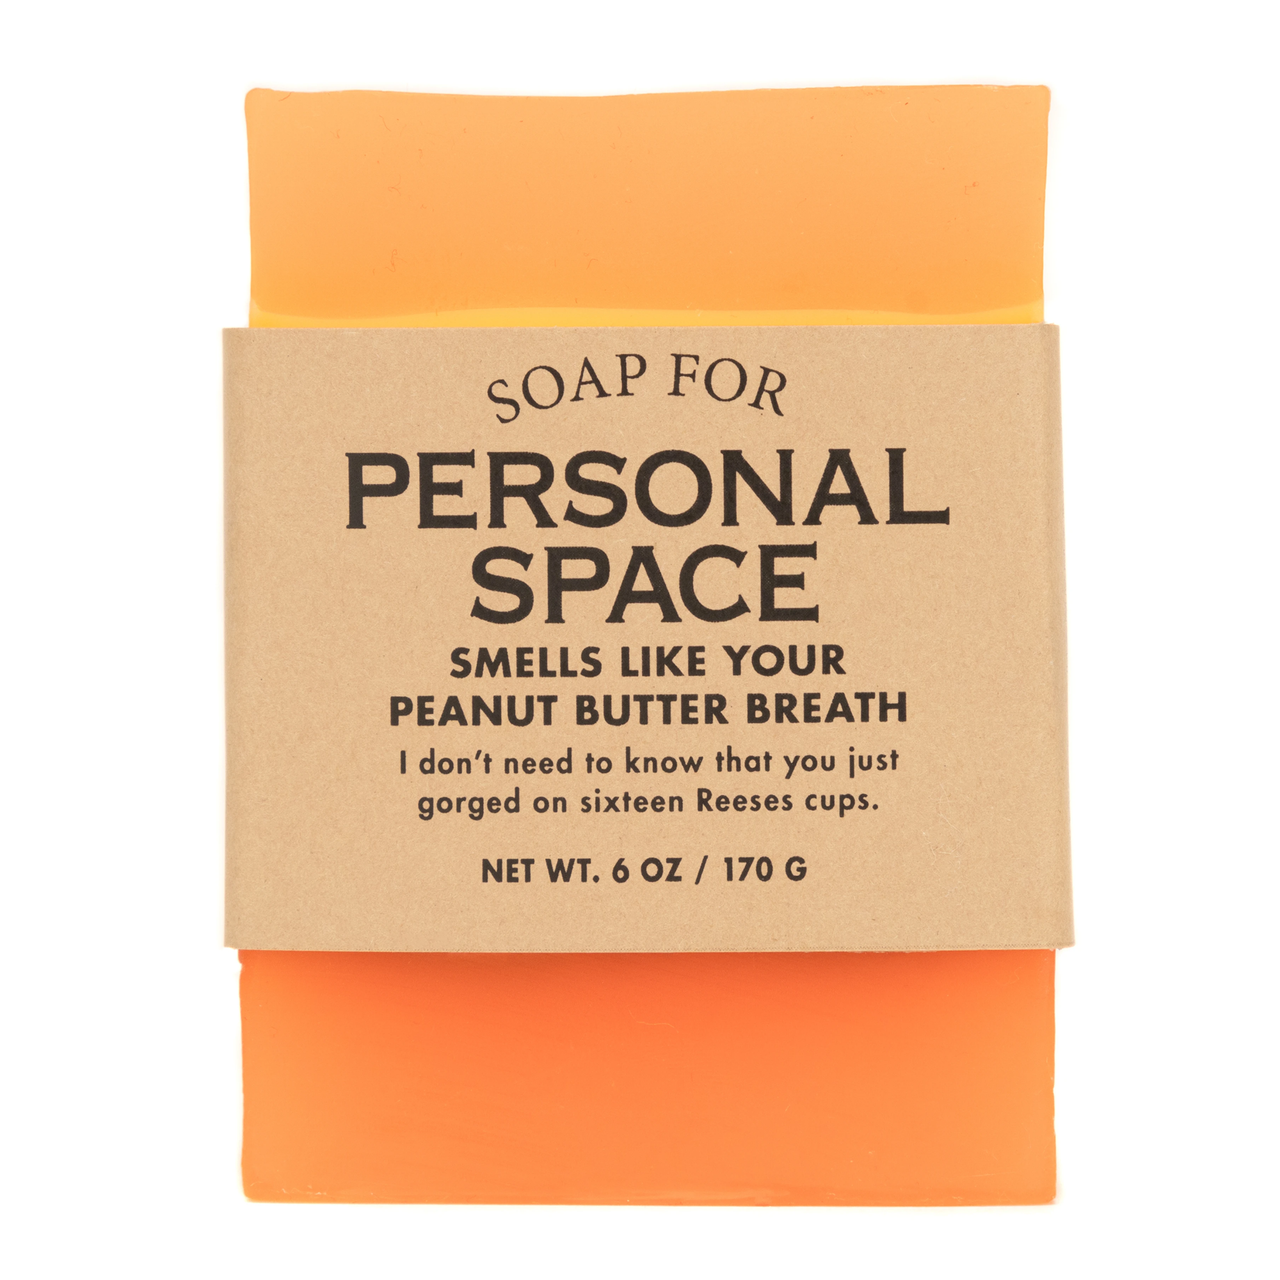 WHISKEY RIVER SOAP CO. PERSONAL SPACE SOAP